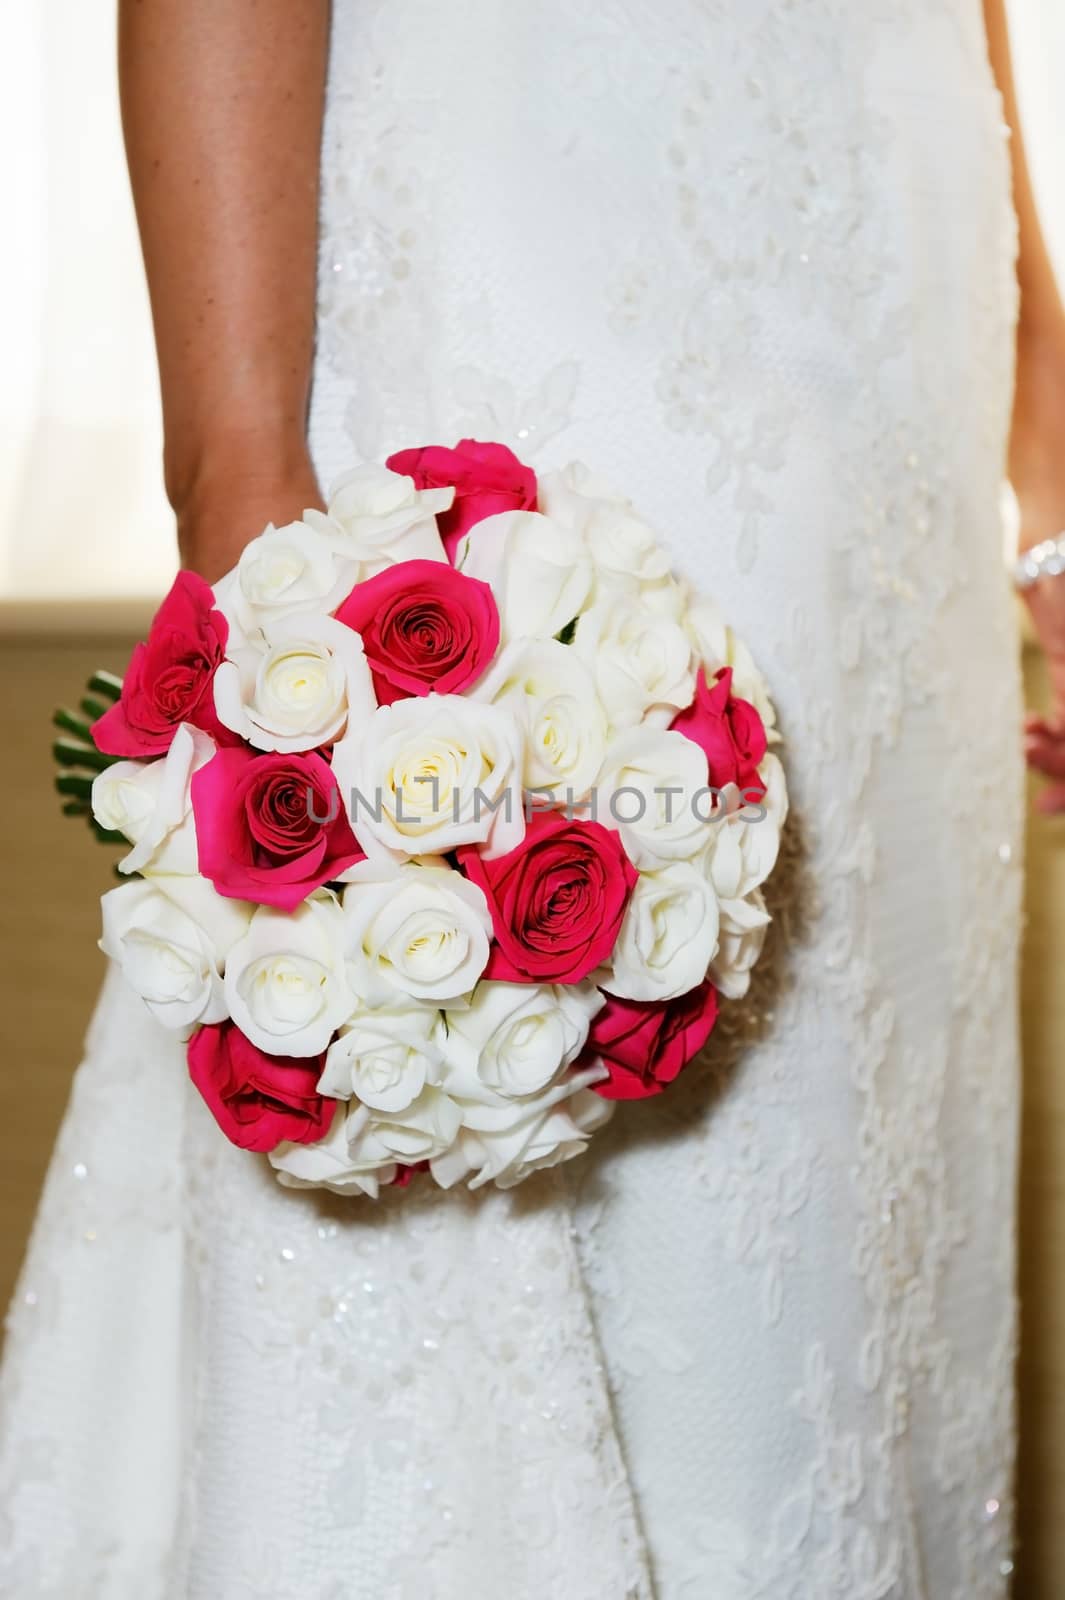 Brides rose bouquet by kmwphotography